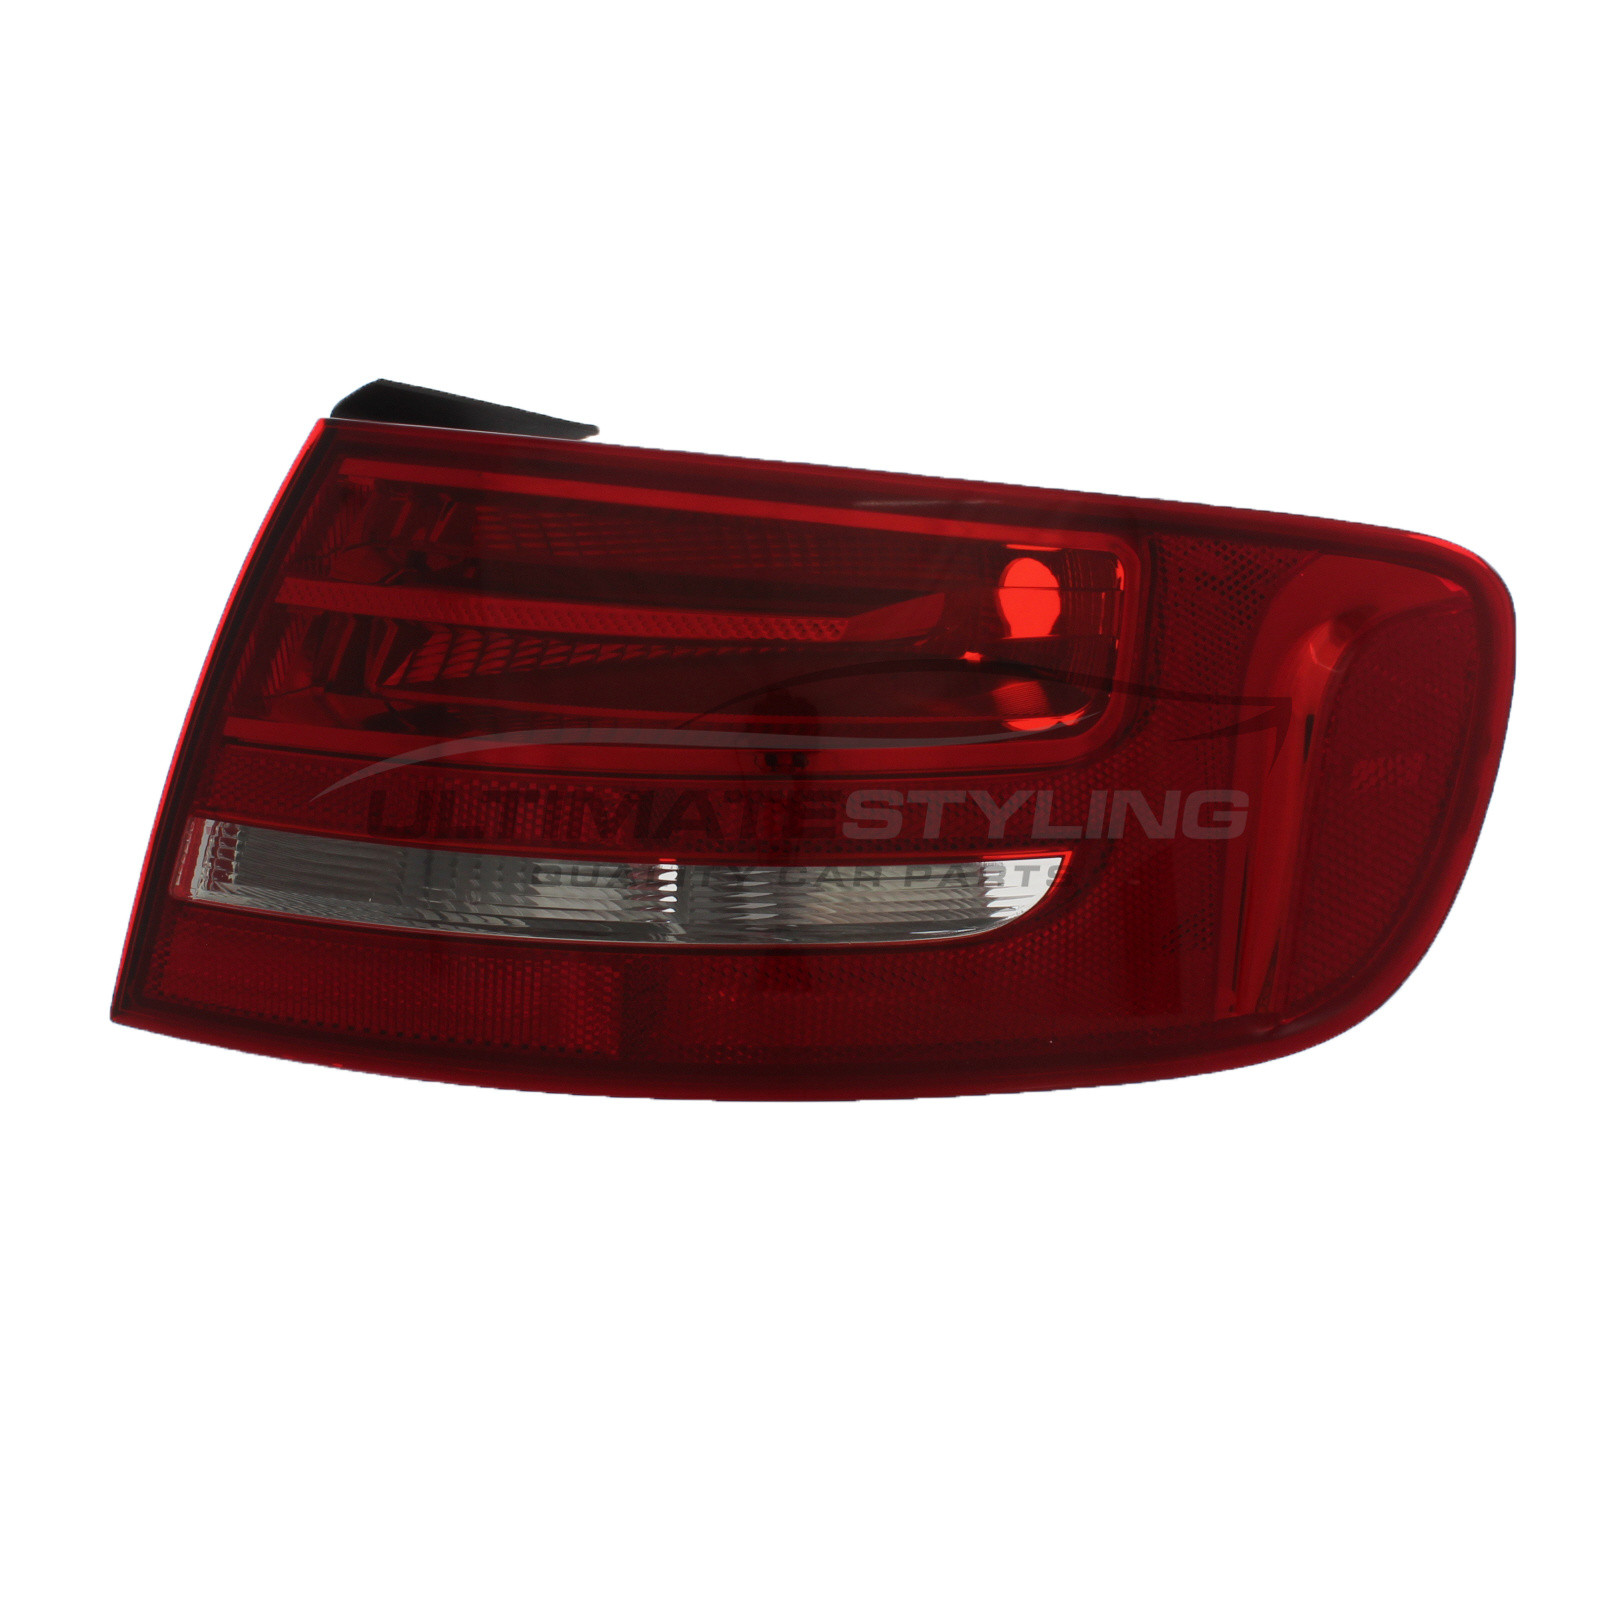 Audi A4 2008-2012 Non-LED Outer (Wing) Rear Light / Tail Light Excluding Bulb Holder Drivers Side (RH)